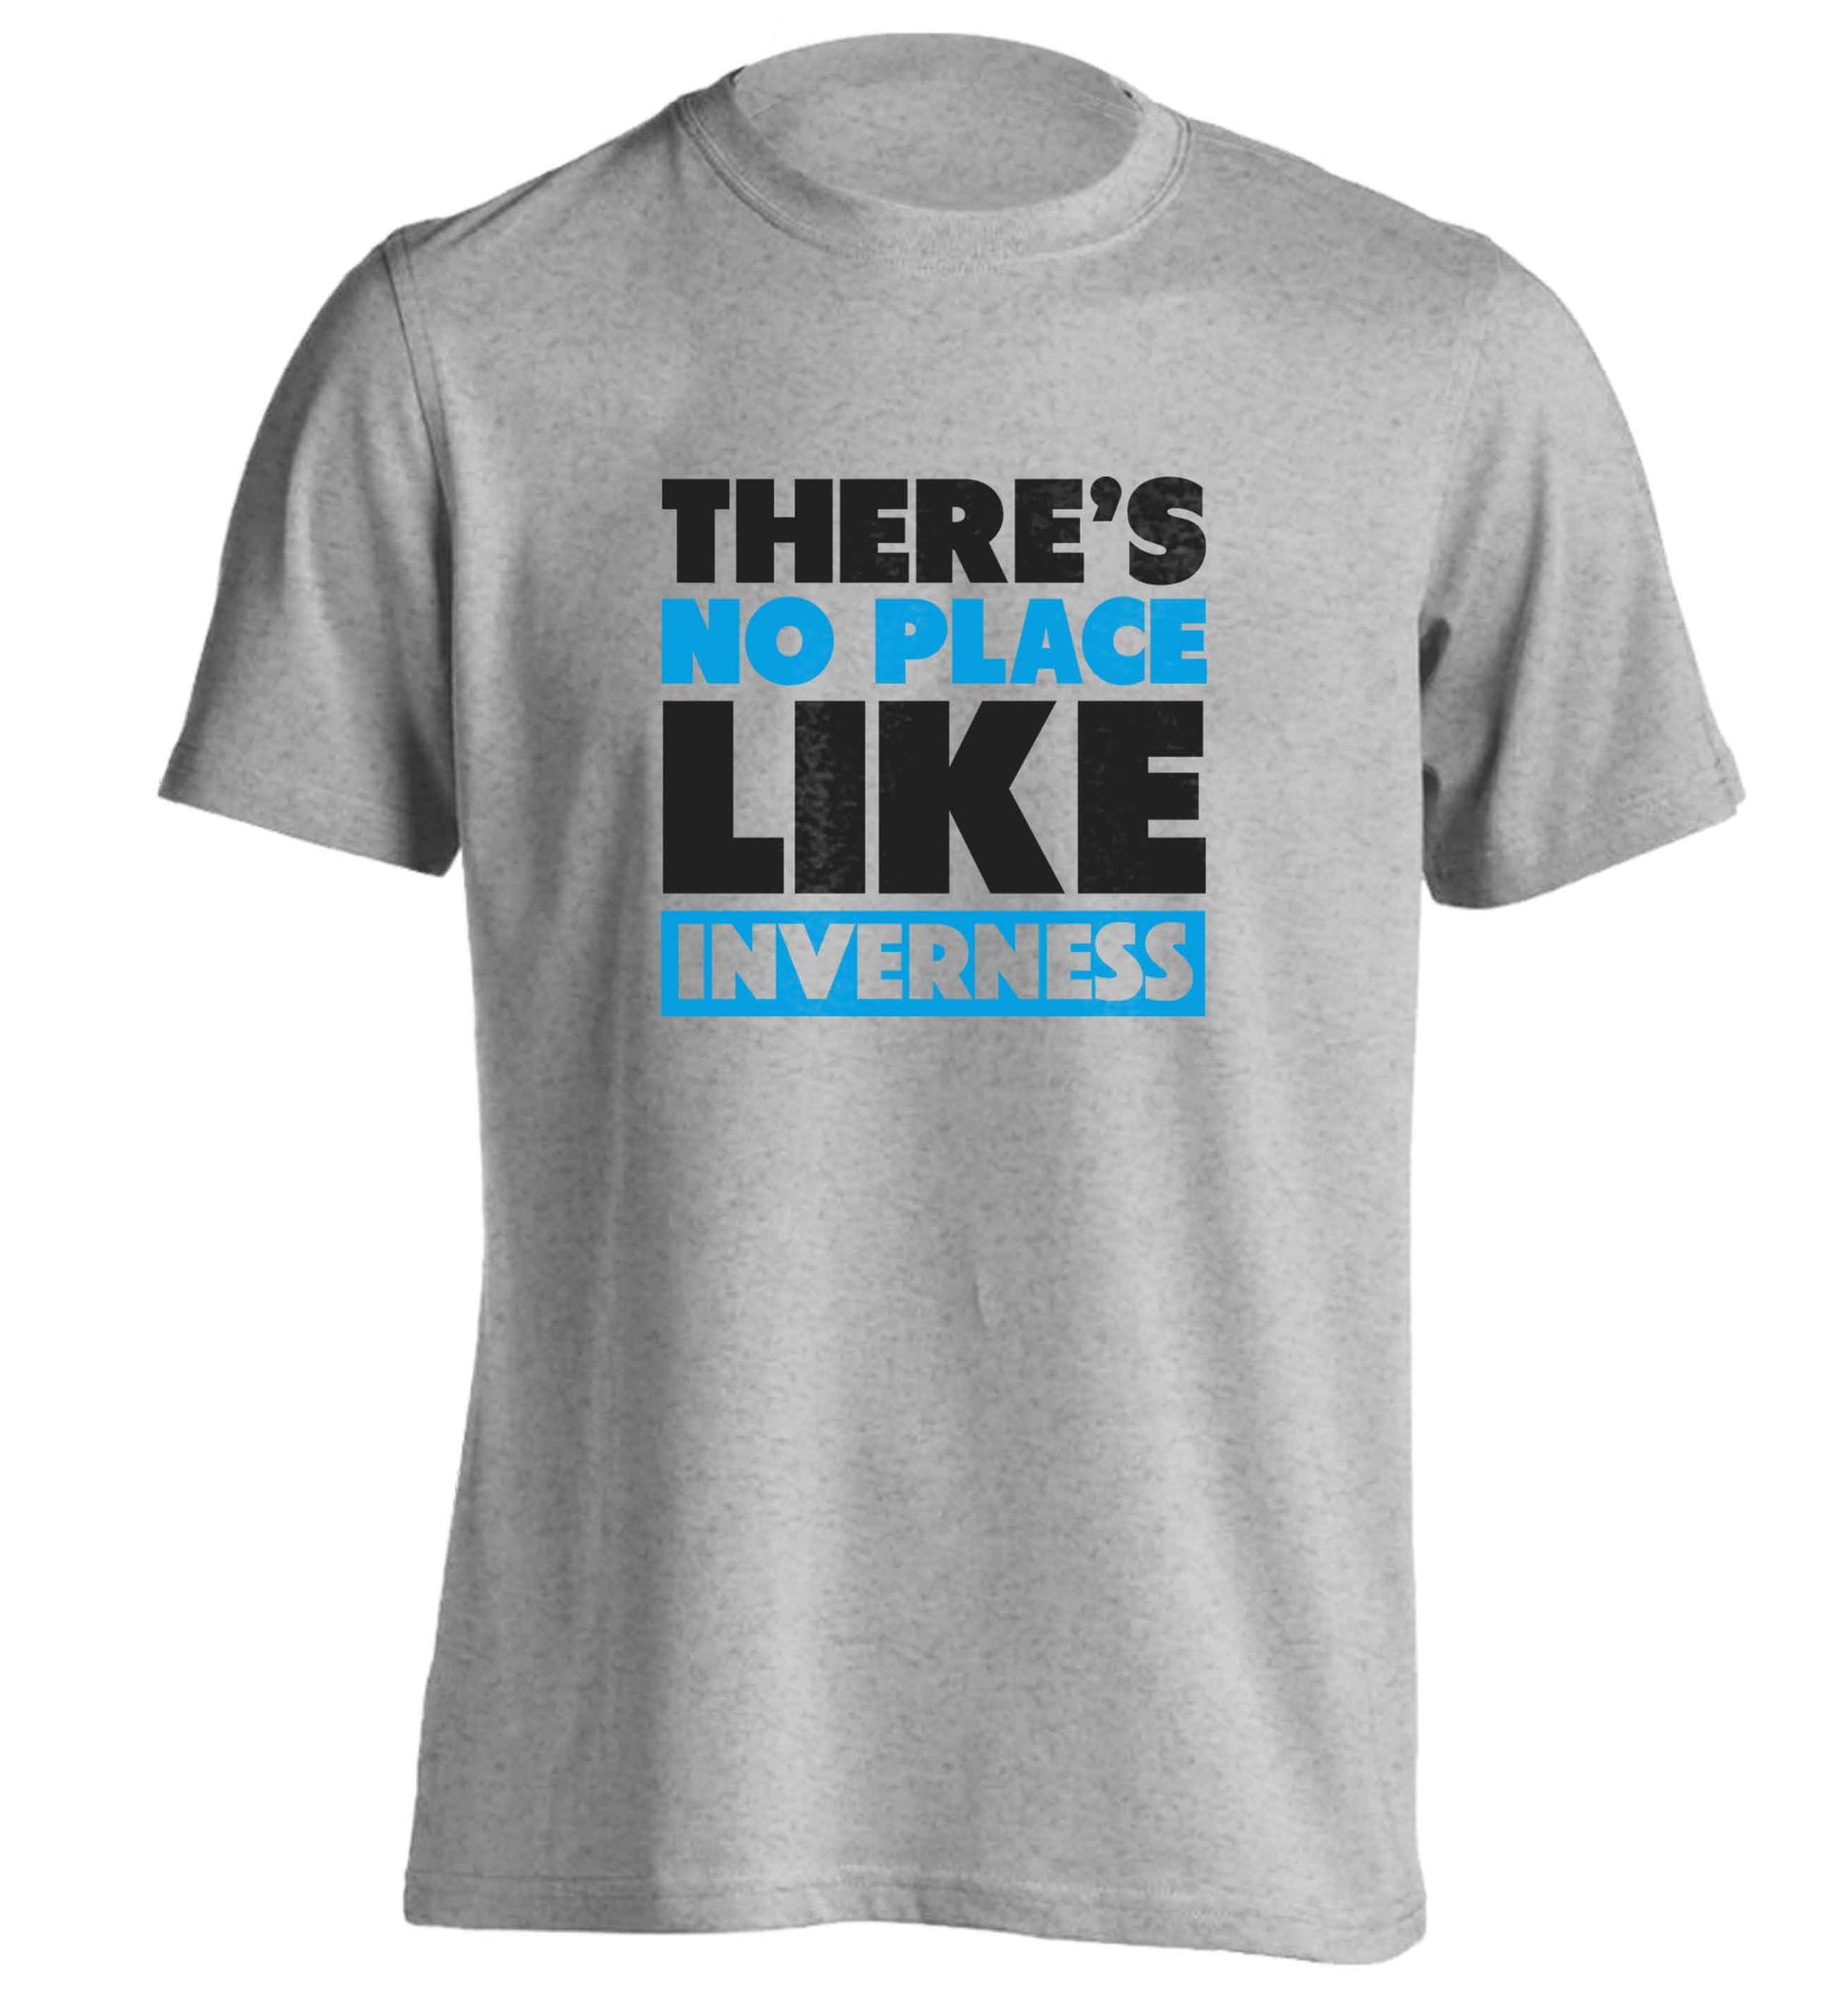 There's no place like Inverness adults unisex grey Tshirt 2XL